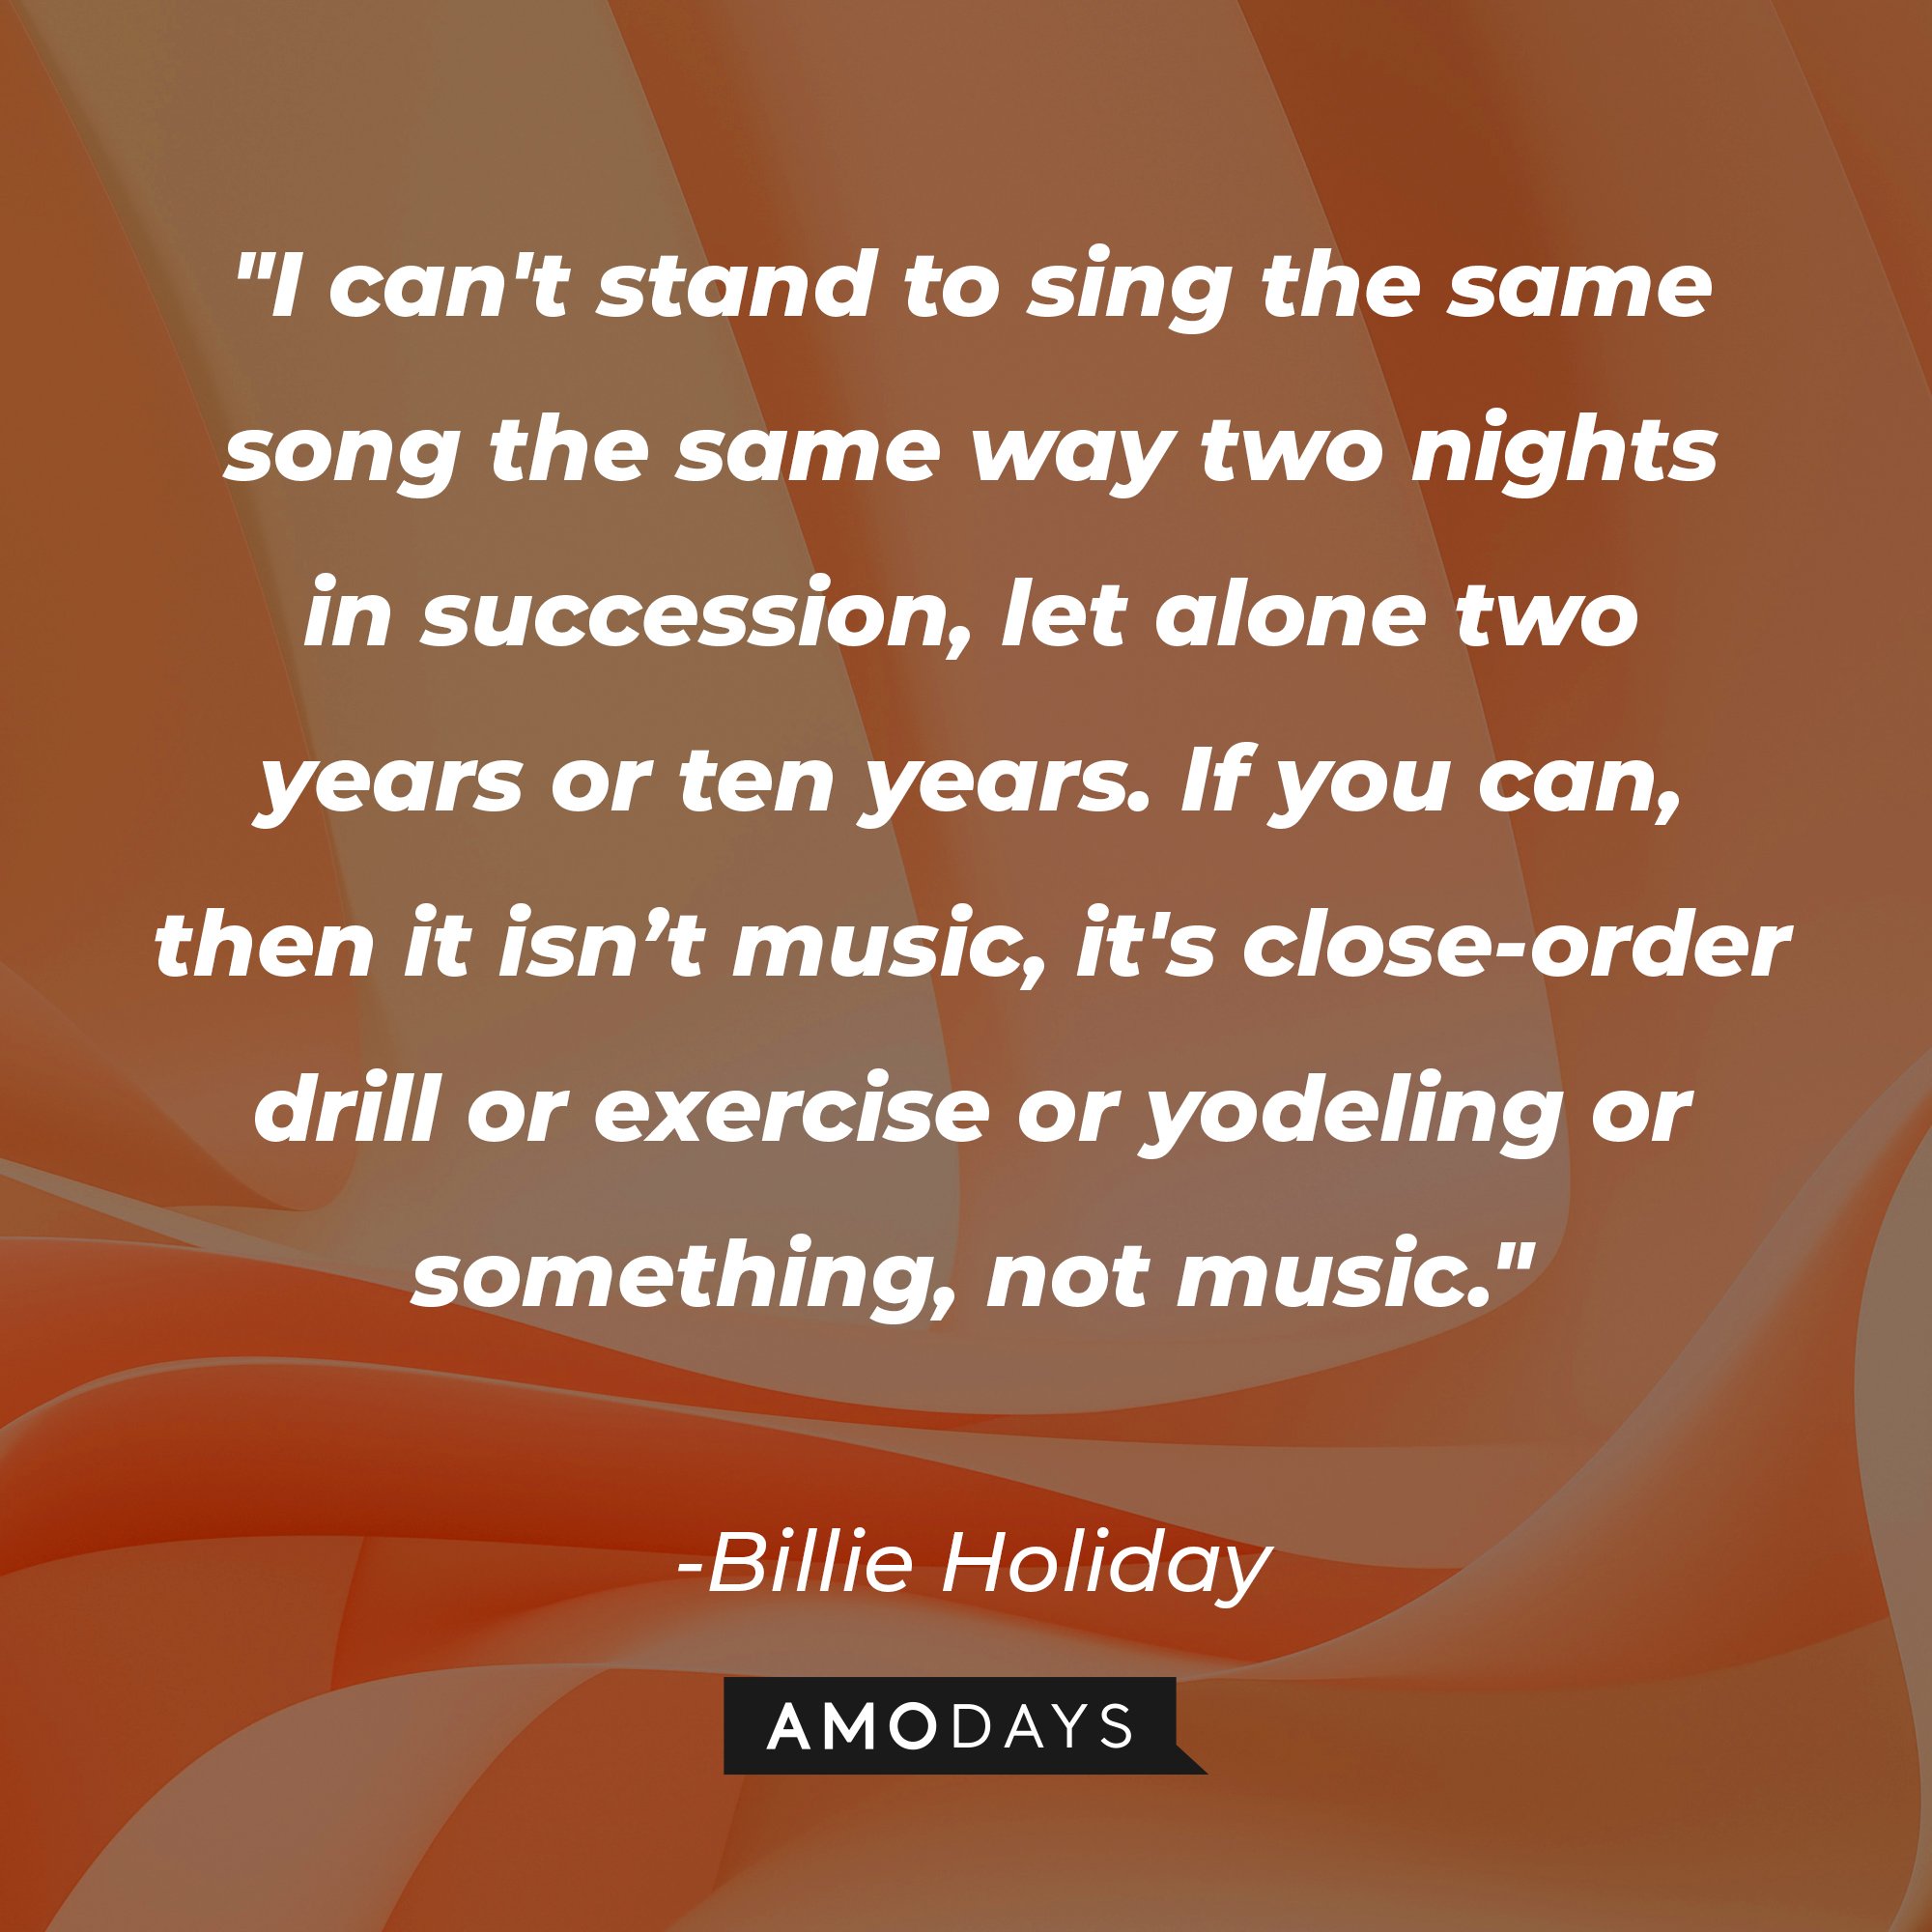 Billie Holiday's quote "I can't stand to sing the same song the same way two nights in succession, let alone two years or ten years. If you can, then it isn’t music, it's close-order drill or exercise or yodeling or something, not music." | Source: Unsplash.com